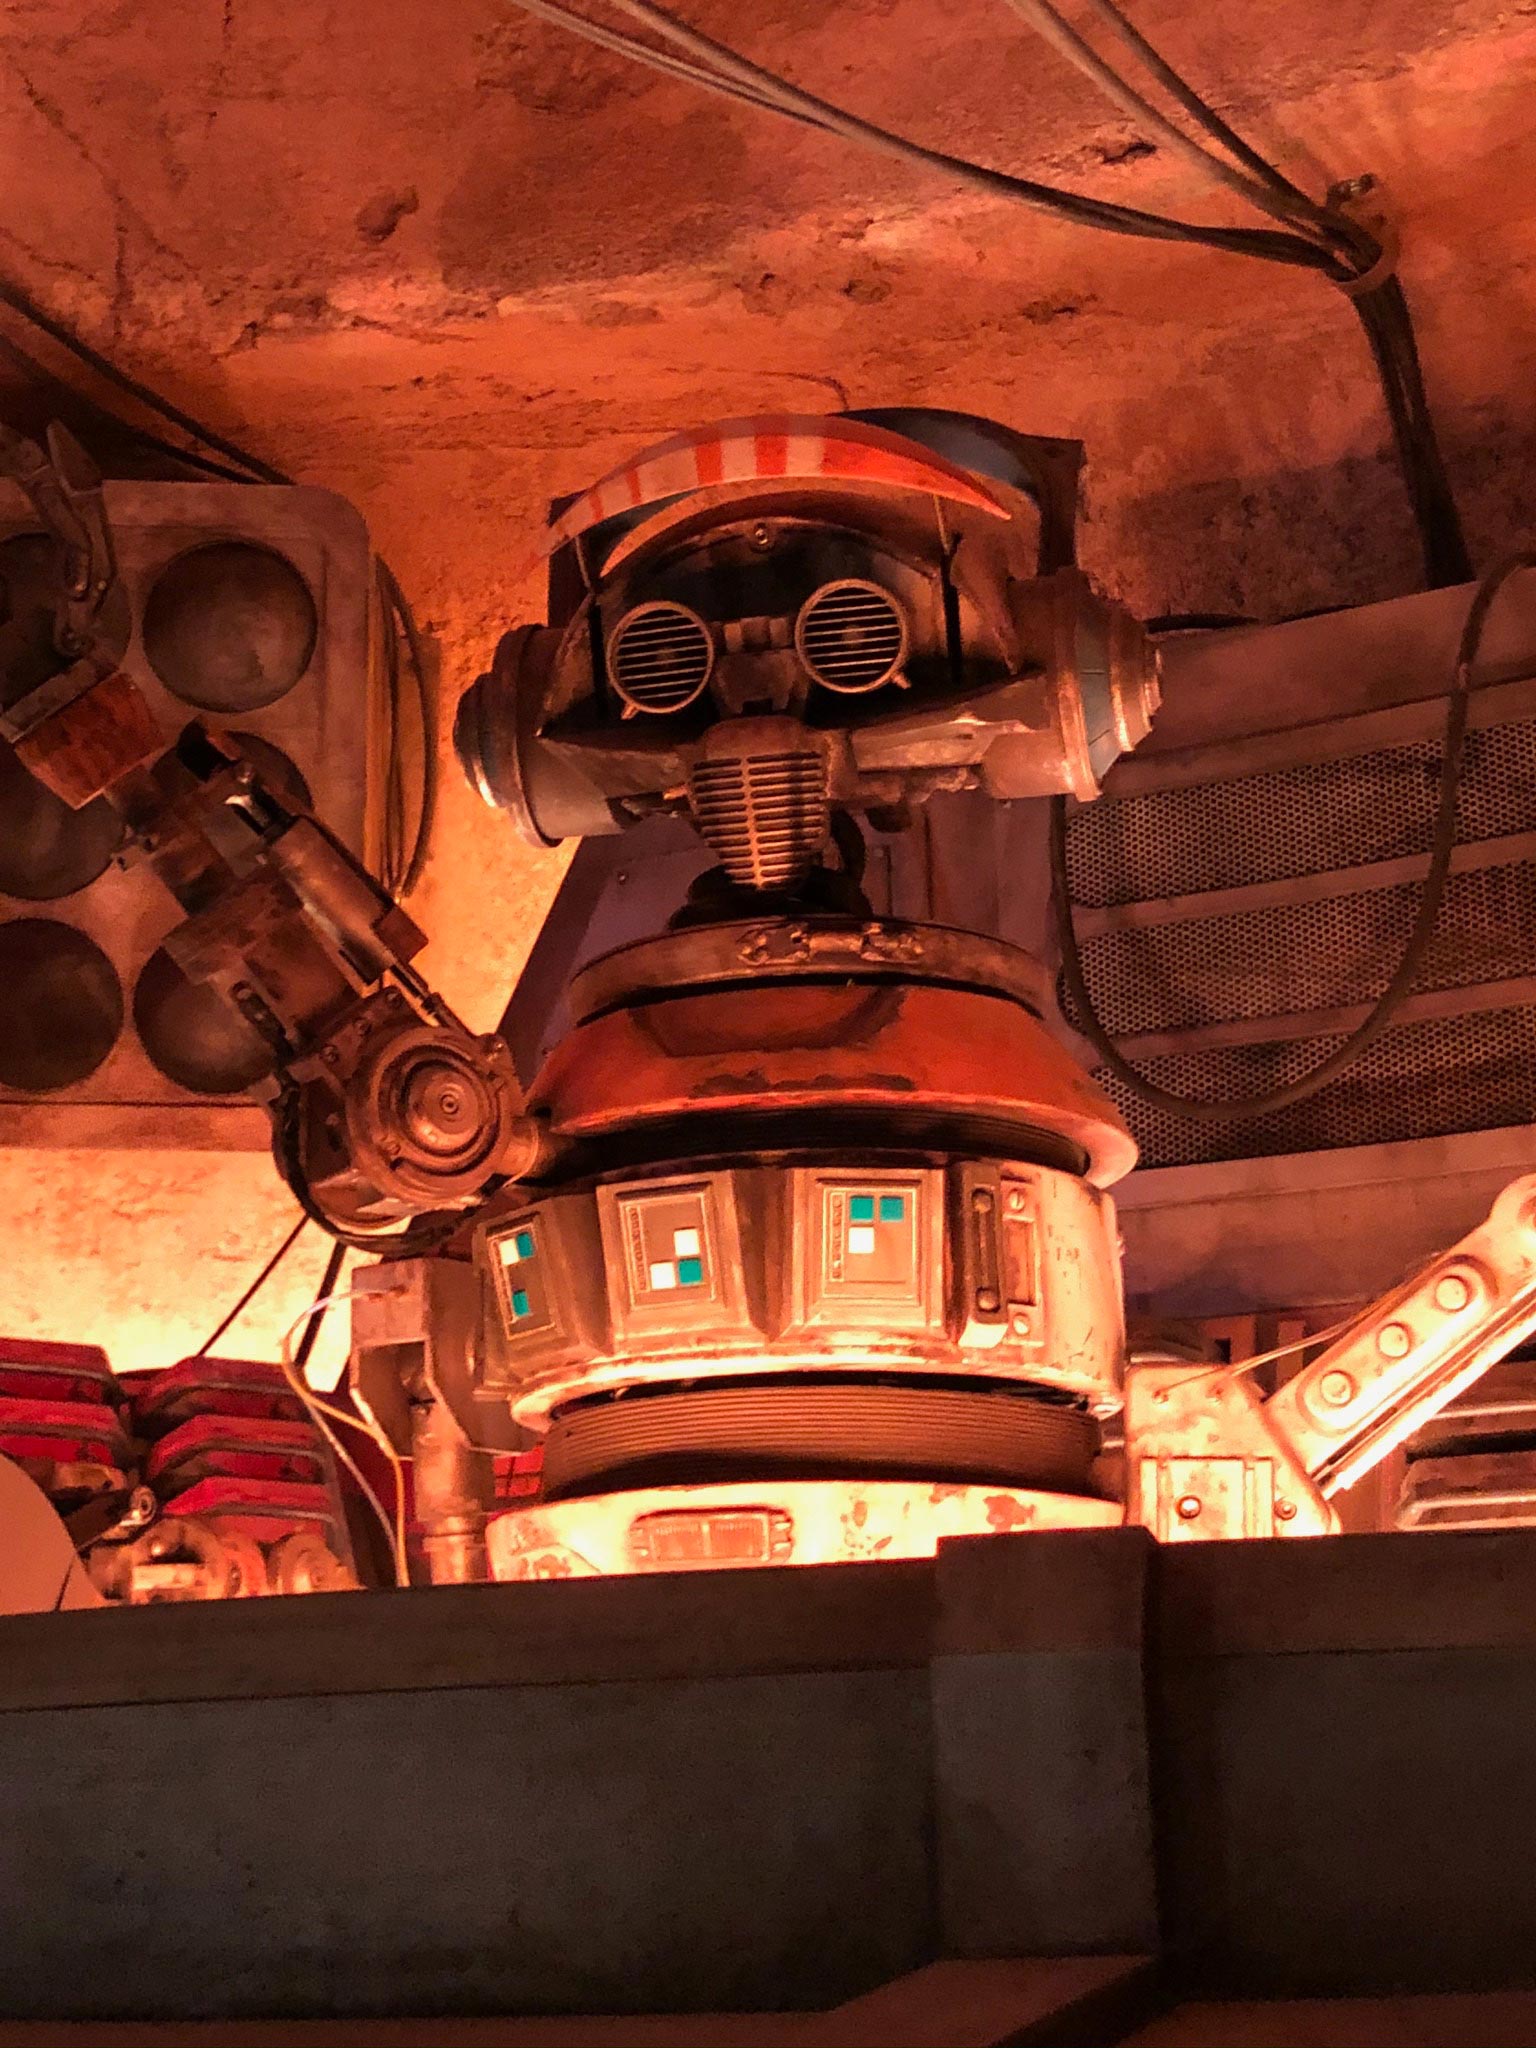 Small robot sitting on high shelf lit with orange-red lighting from underneath at Oga's Cantina. Star Wars: Galaxy's Edge at Disney's Hollywood Studios®. Lake Buena Vista, Florida.